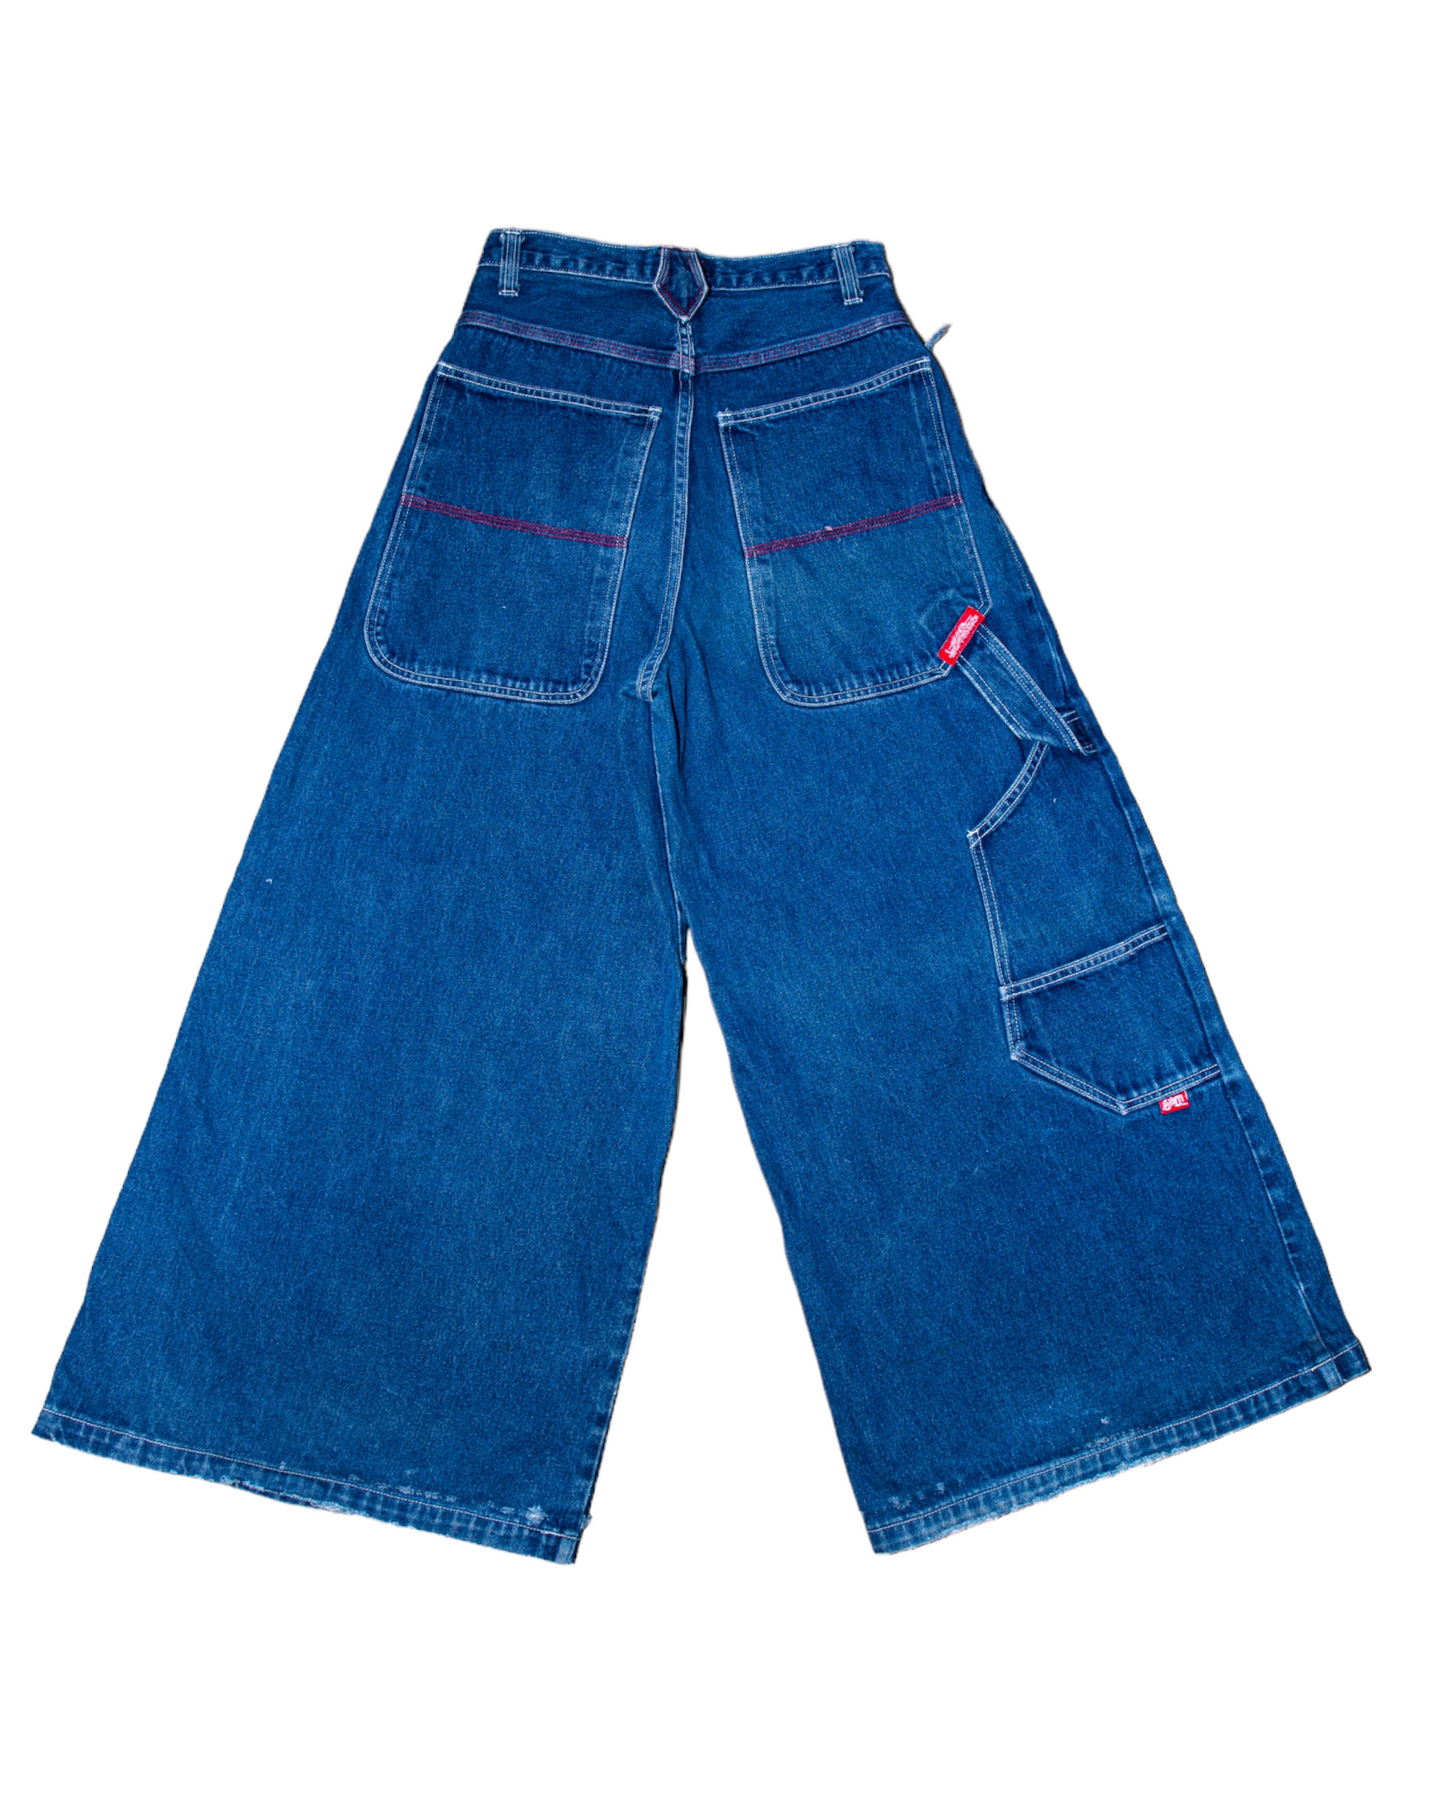 90'S GAT JEANS GYPSYS & THIEVES RAVE SKATE WIDE LEG JEANS